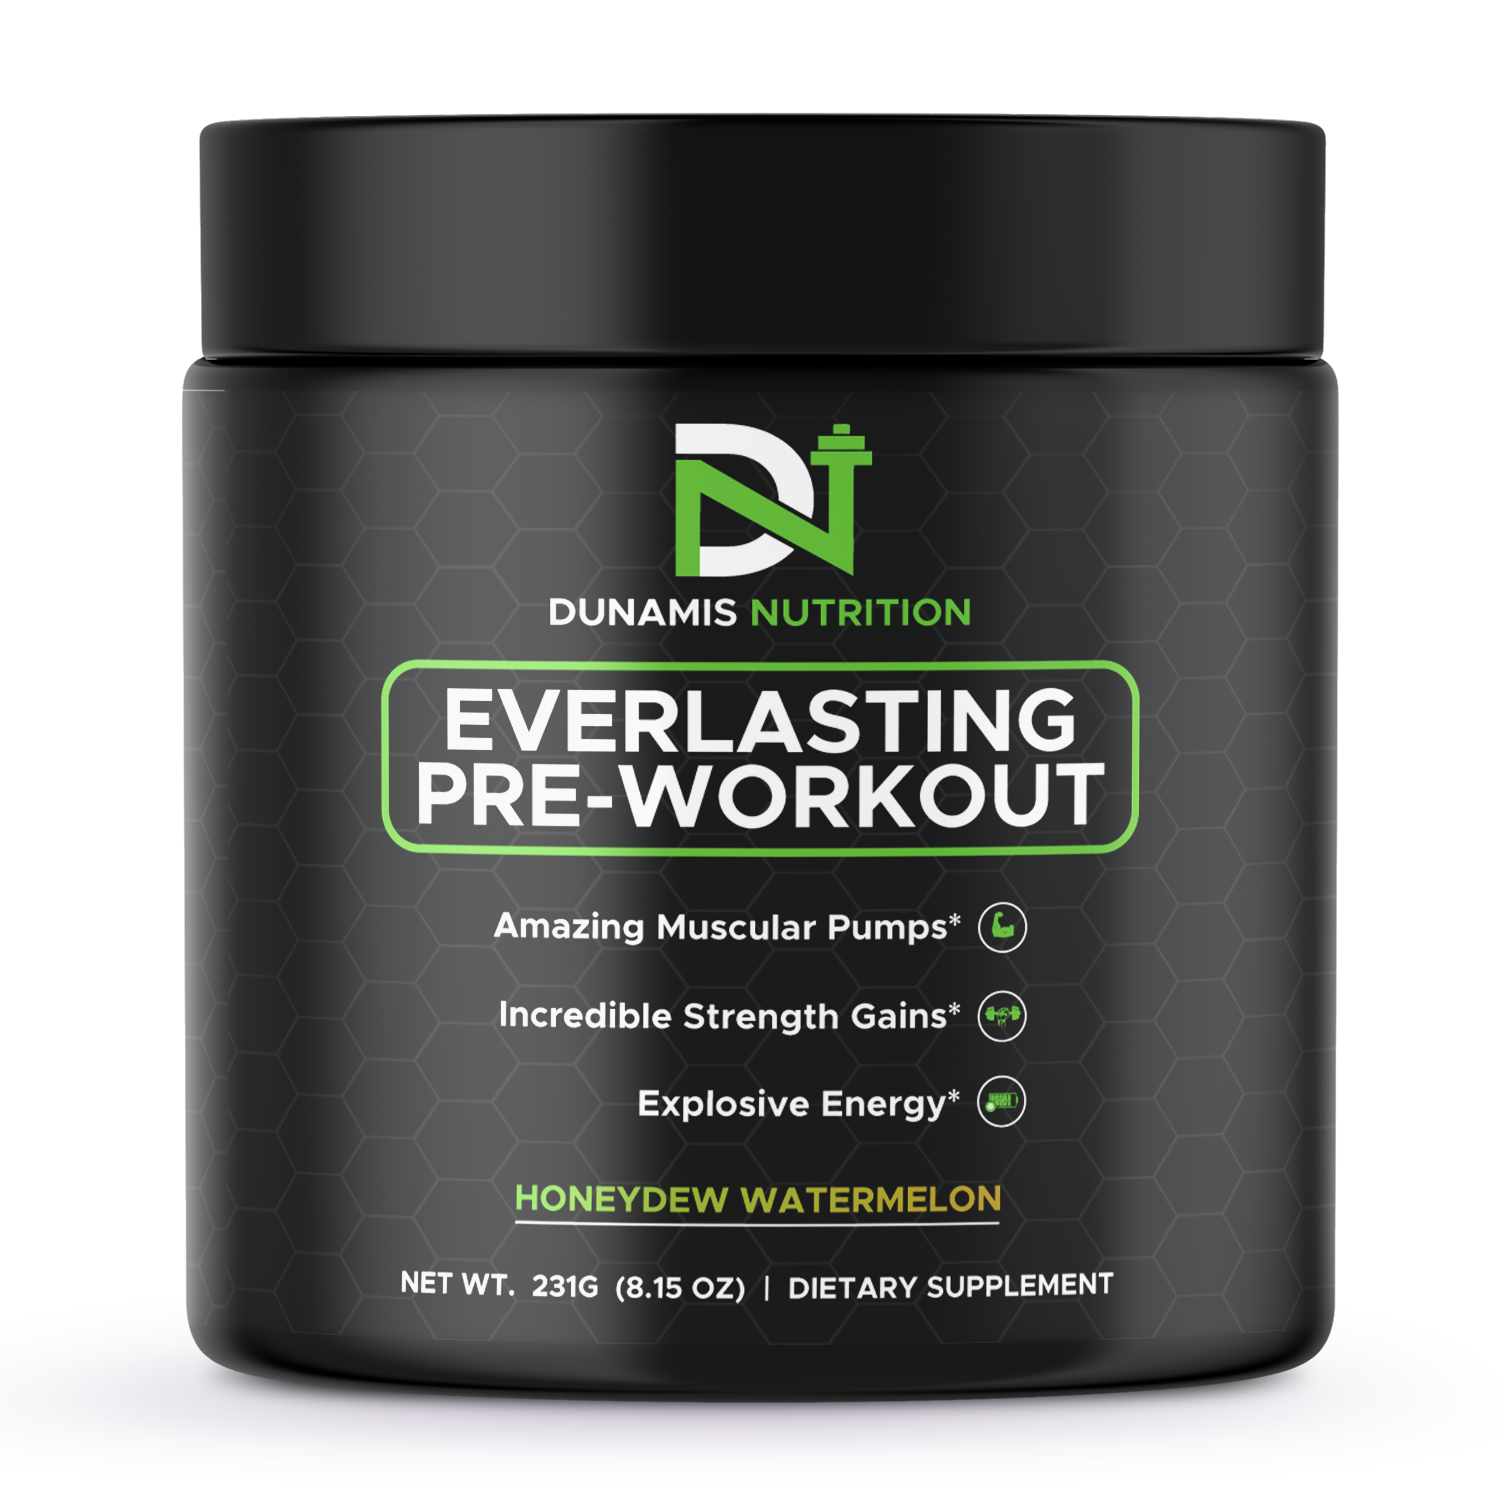 Everlasting Pre-Workout